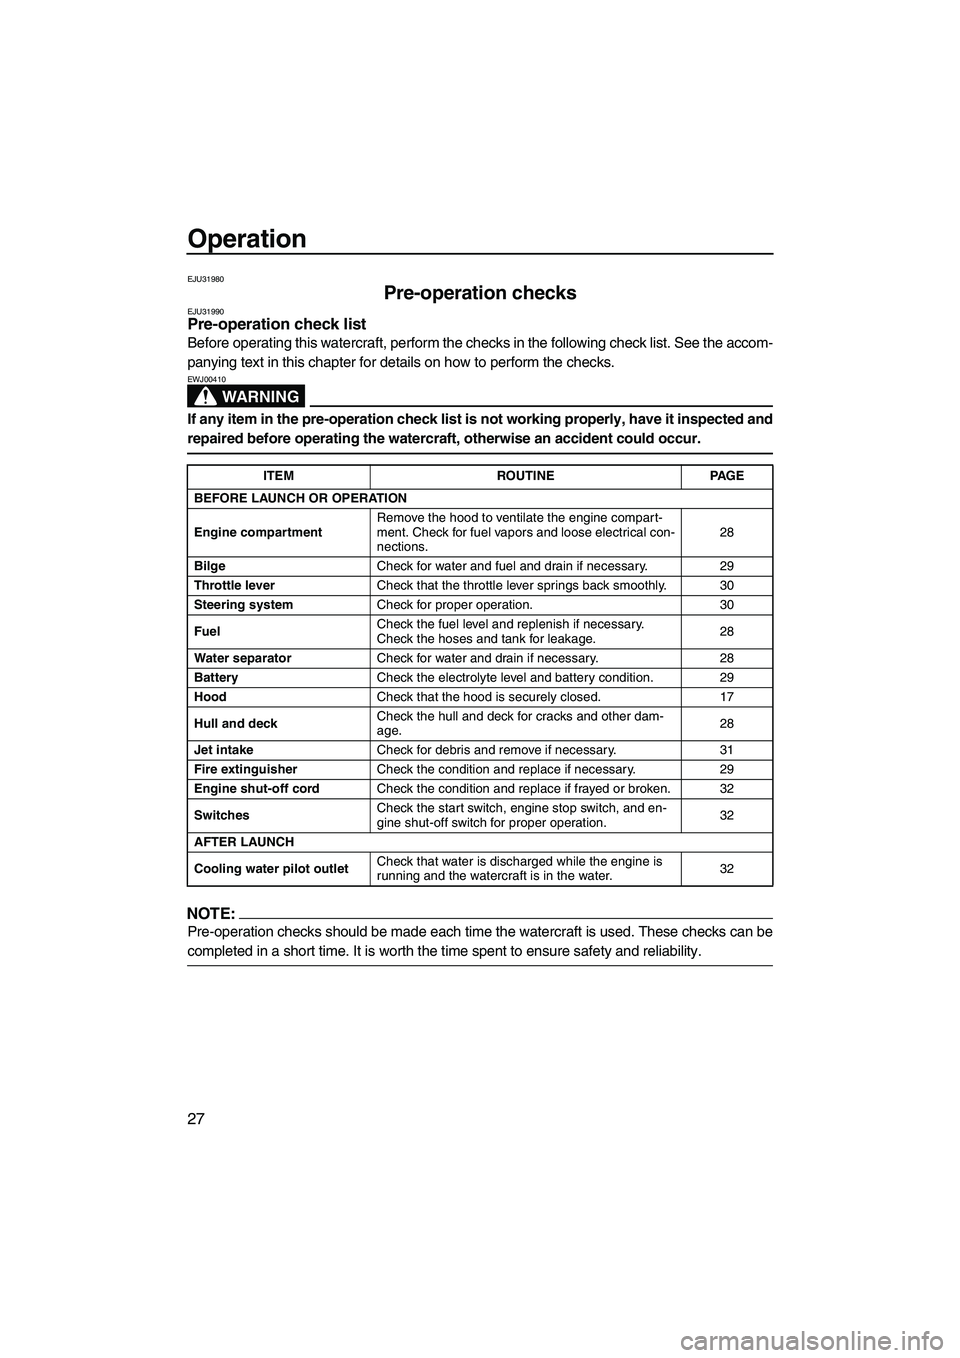 YAMAHA SUPERJET 2008  Owners Manual Operation
27
EJU31980
Pre-operation checks EJU31990Pre-operation check list 
Before operating this watercraft, perform the checks in the following check list. See the accom-
panying text in this chapt